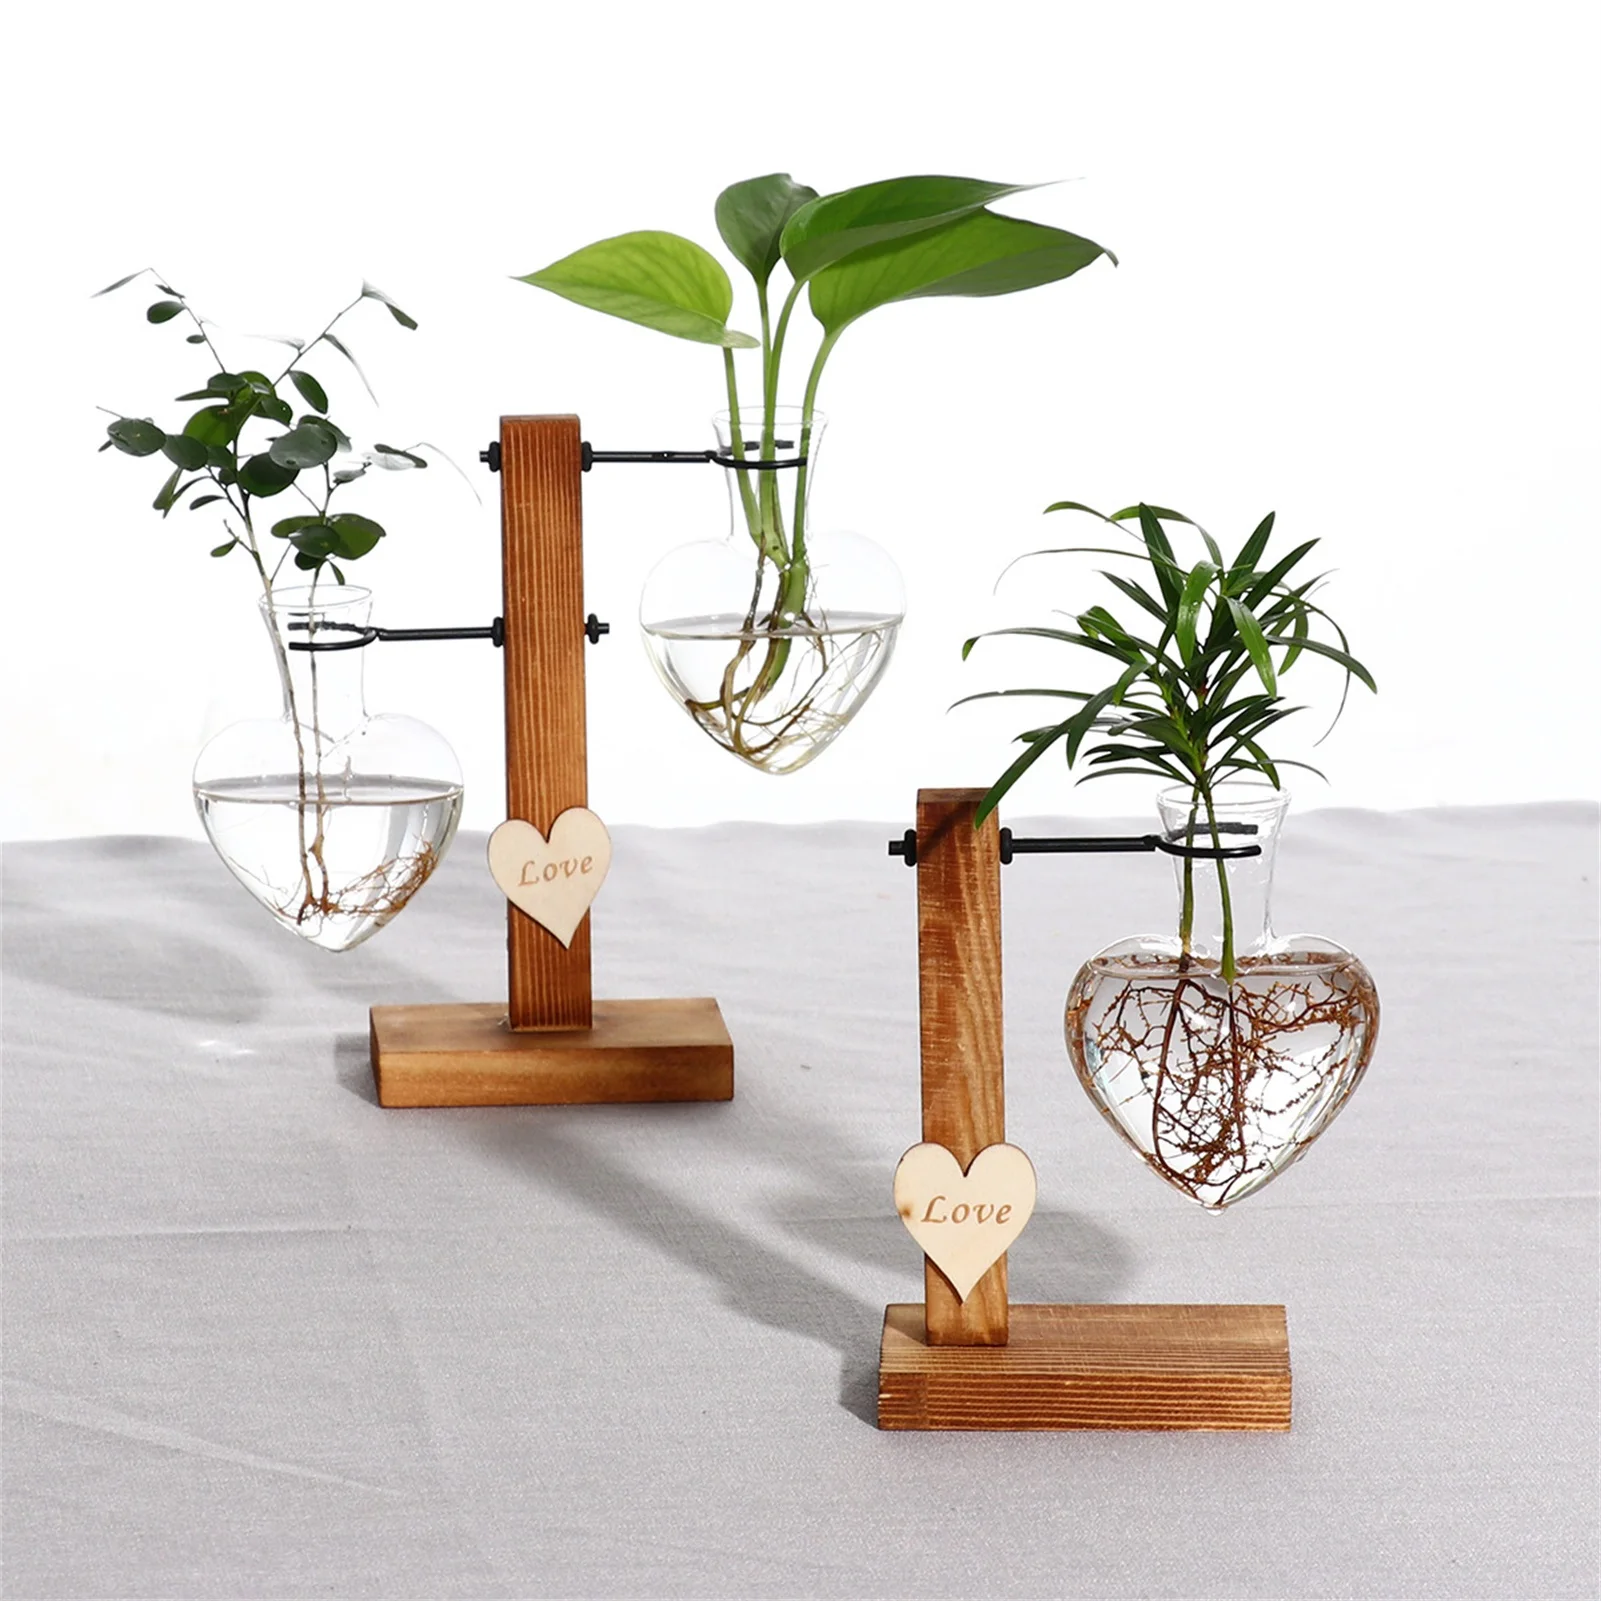 

Glass Planter Hydroponics Vase Hydroponic Vases Plant Terrarium Heart Glass Vase With Retro Solid Wooden Stand For Home Office W